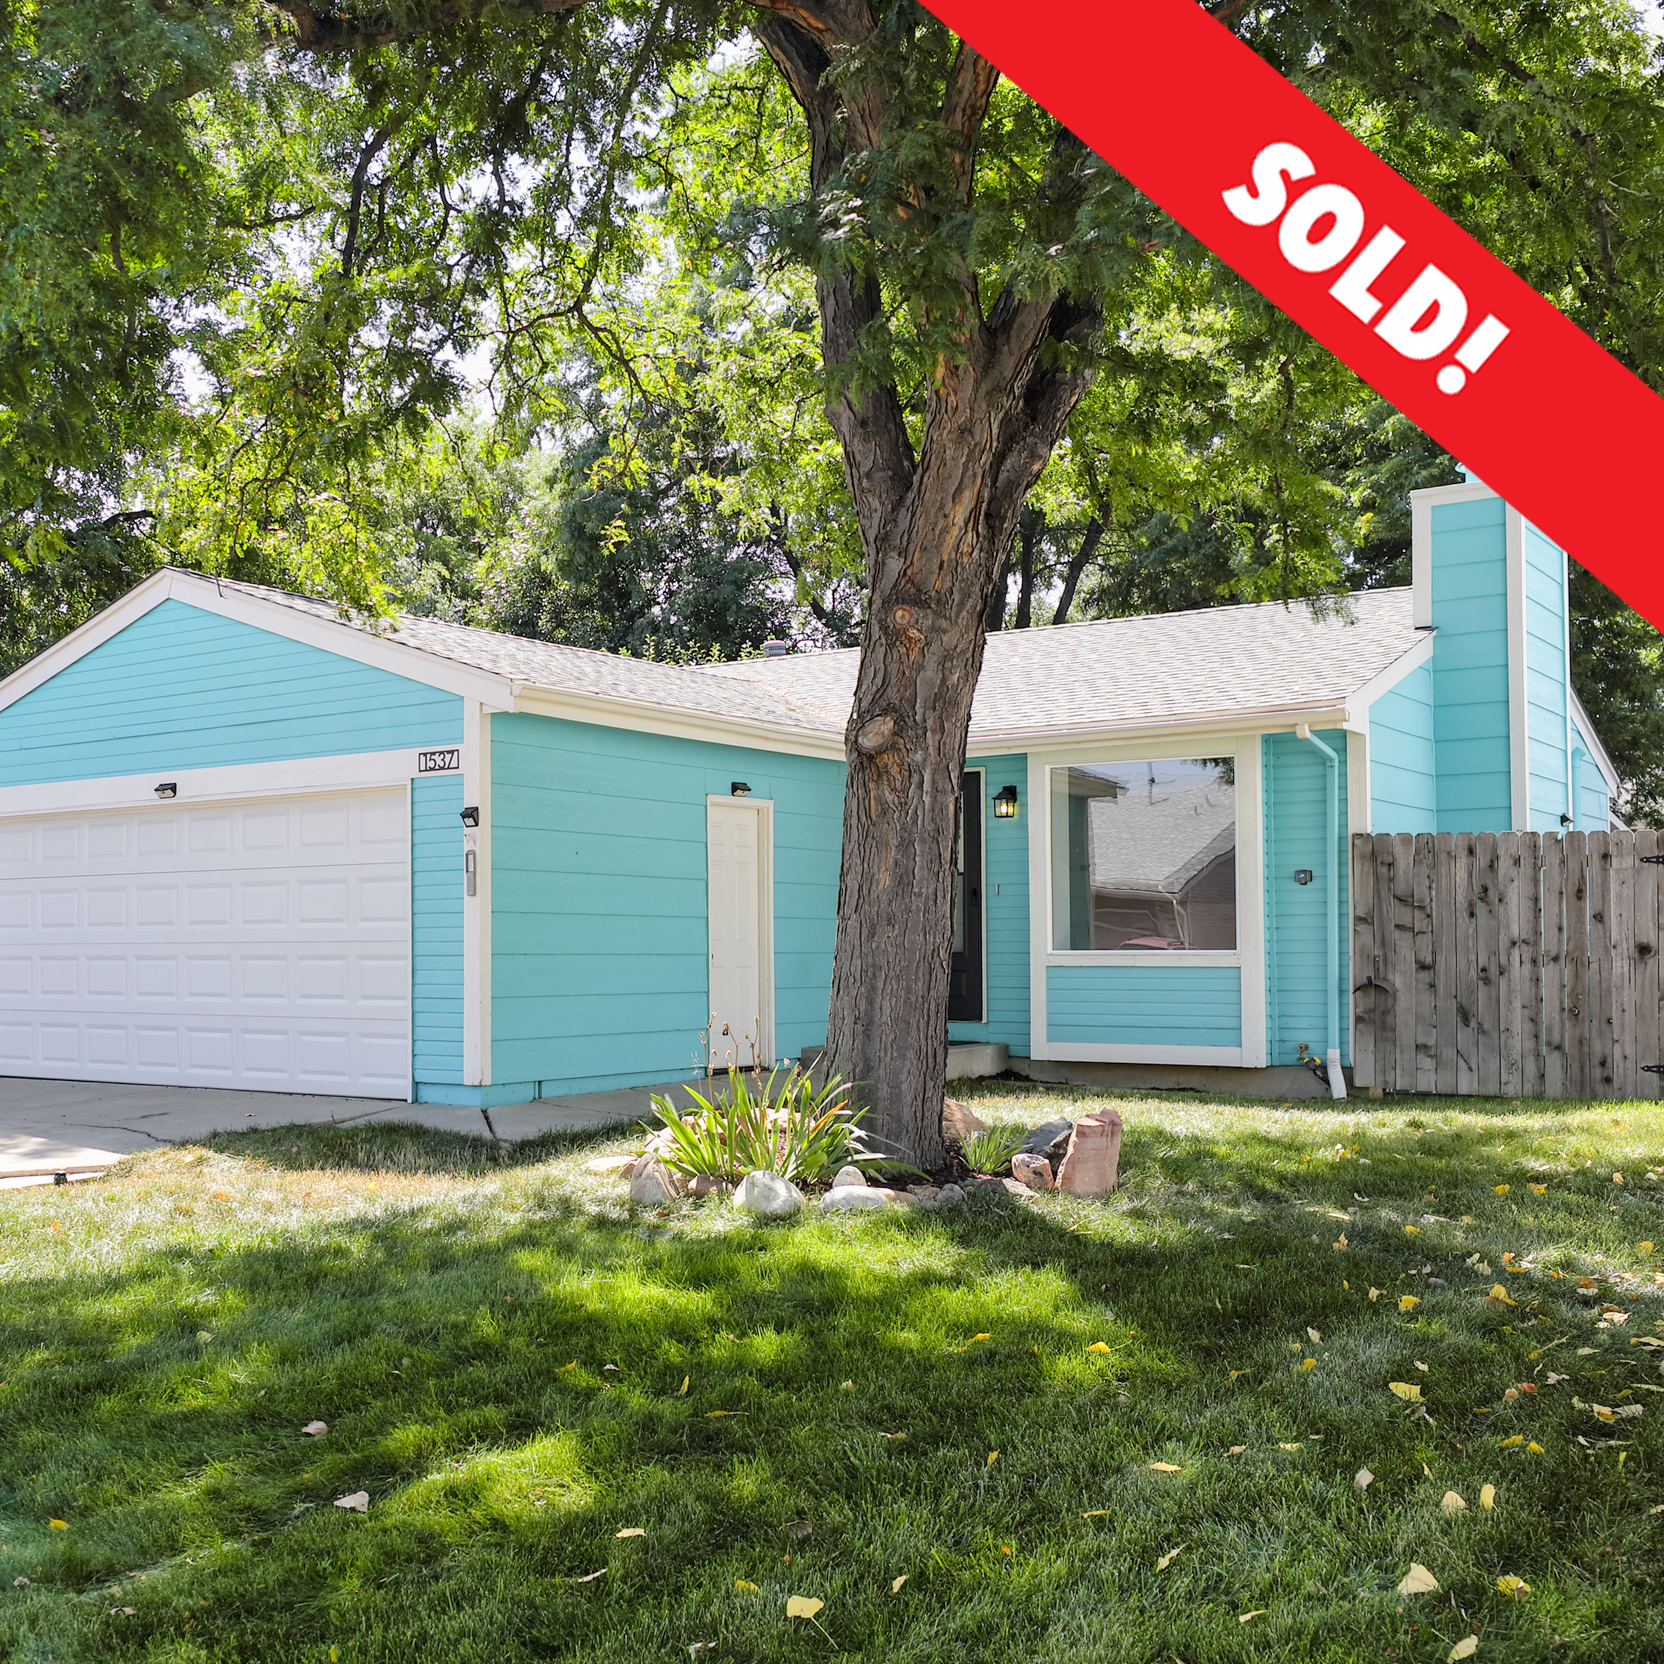  Welcome to 1537 Calkins Avenue in the heart of Northwest Longmont - where your new lifestyle puncuated by this complete home. Being here reveals what you’ve been envisioning in your new home. Quite possibly the most wonderful home in the Wood Meadow